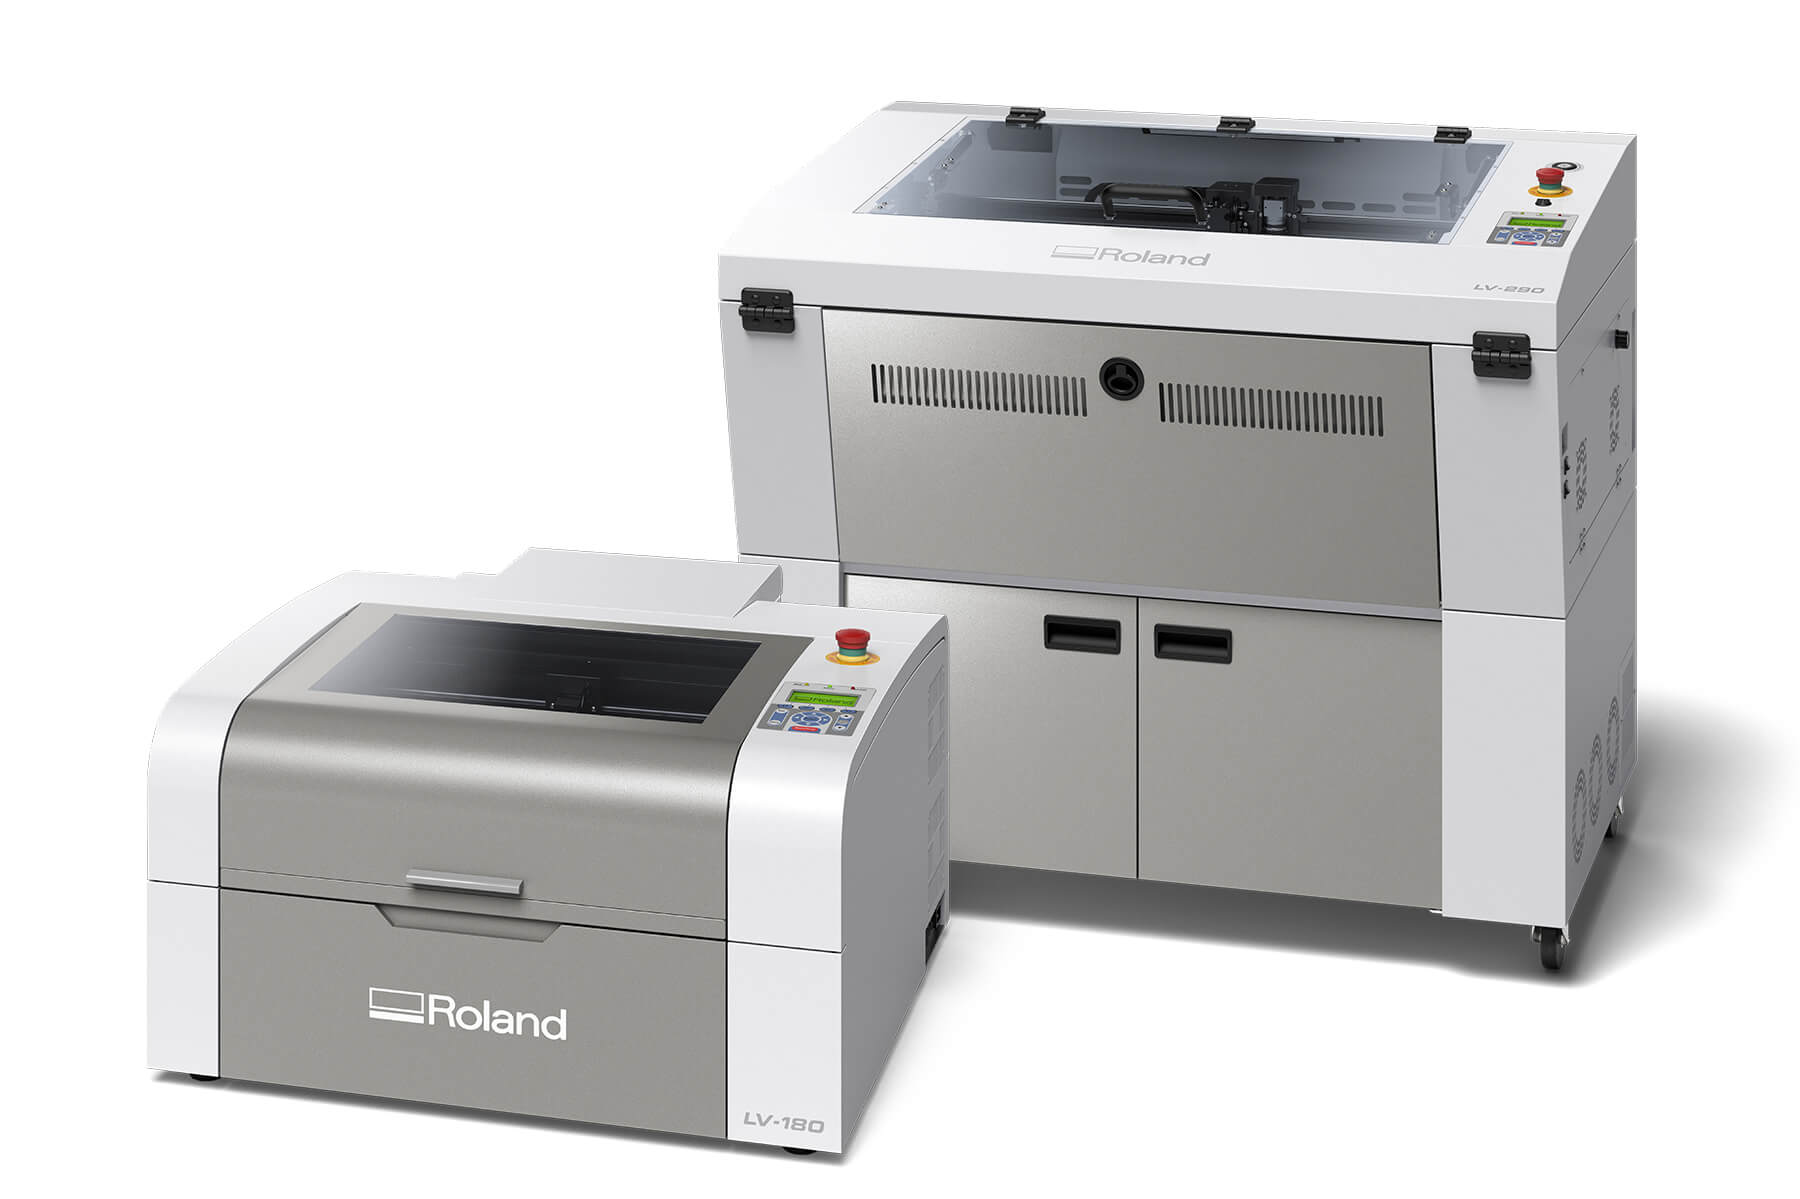 Roland Announces Launch of New LV Series Laser Engraving Machines